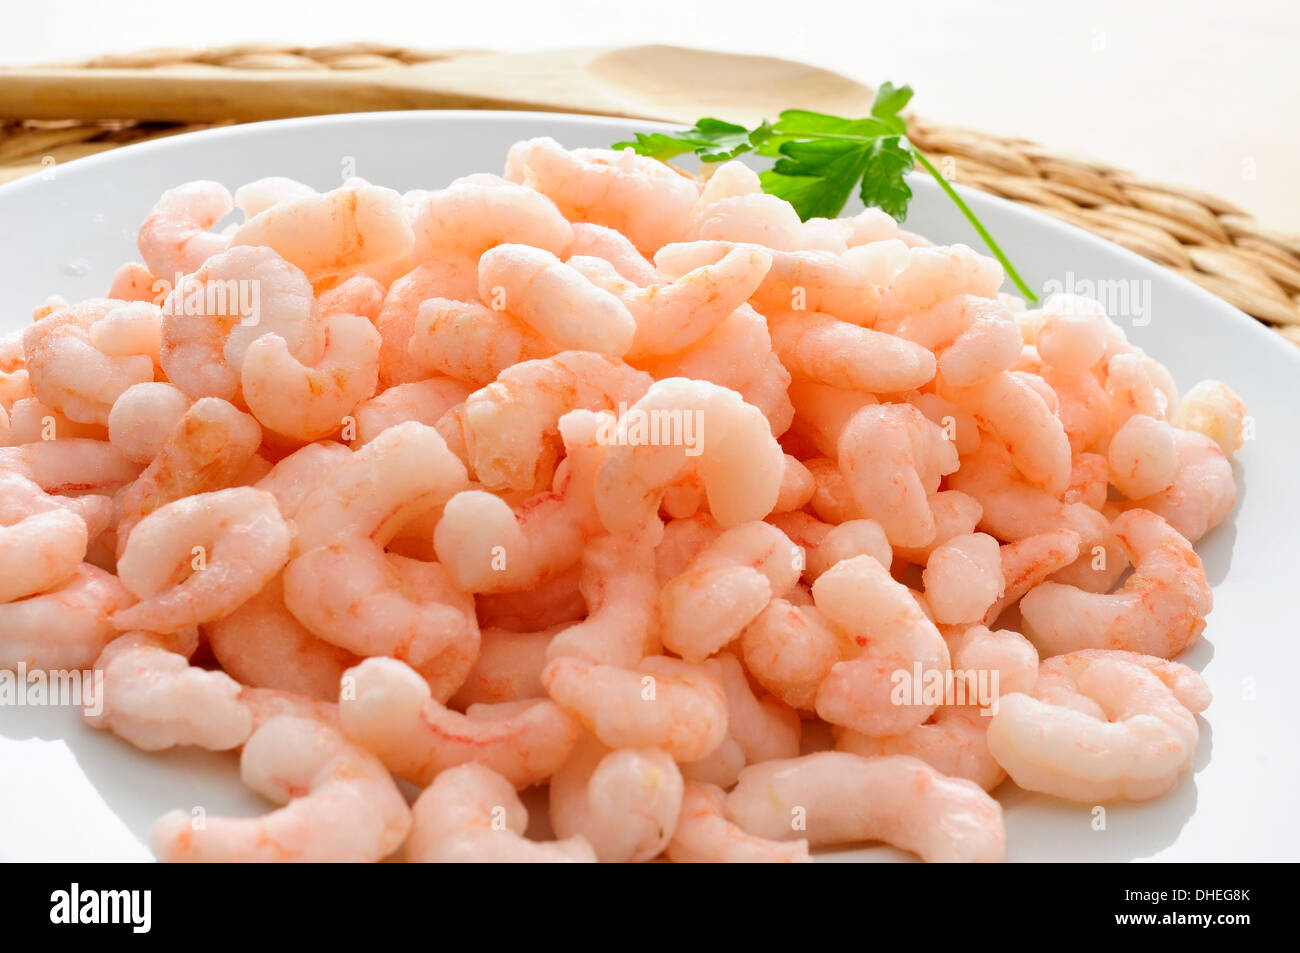 closeup of a plate with shelled raw shrimps Stock Photo